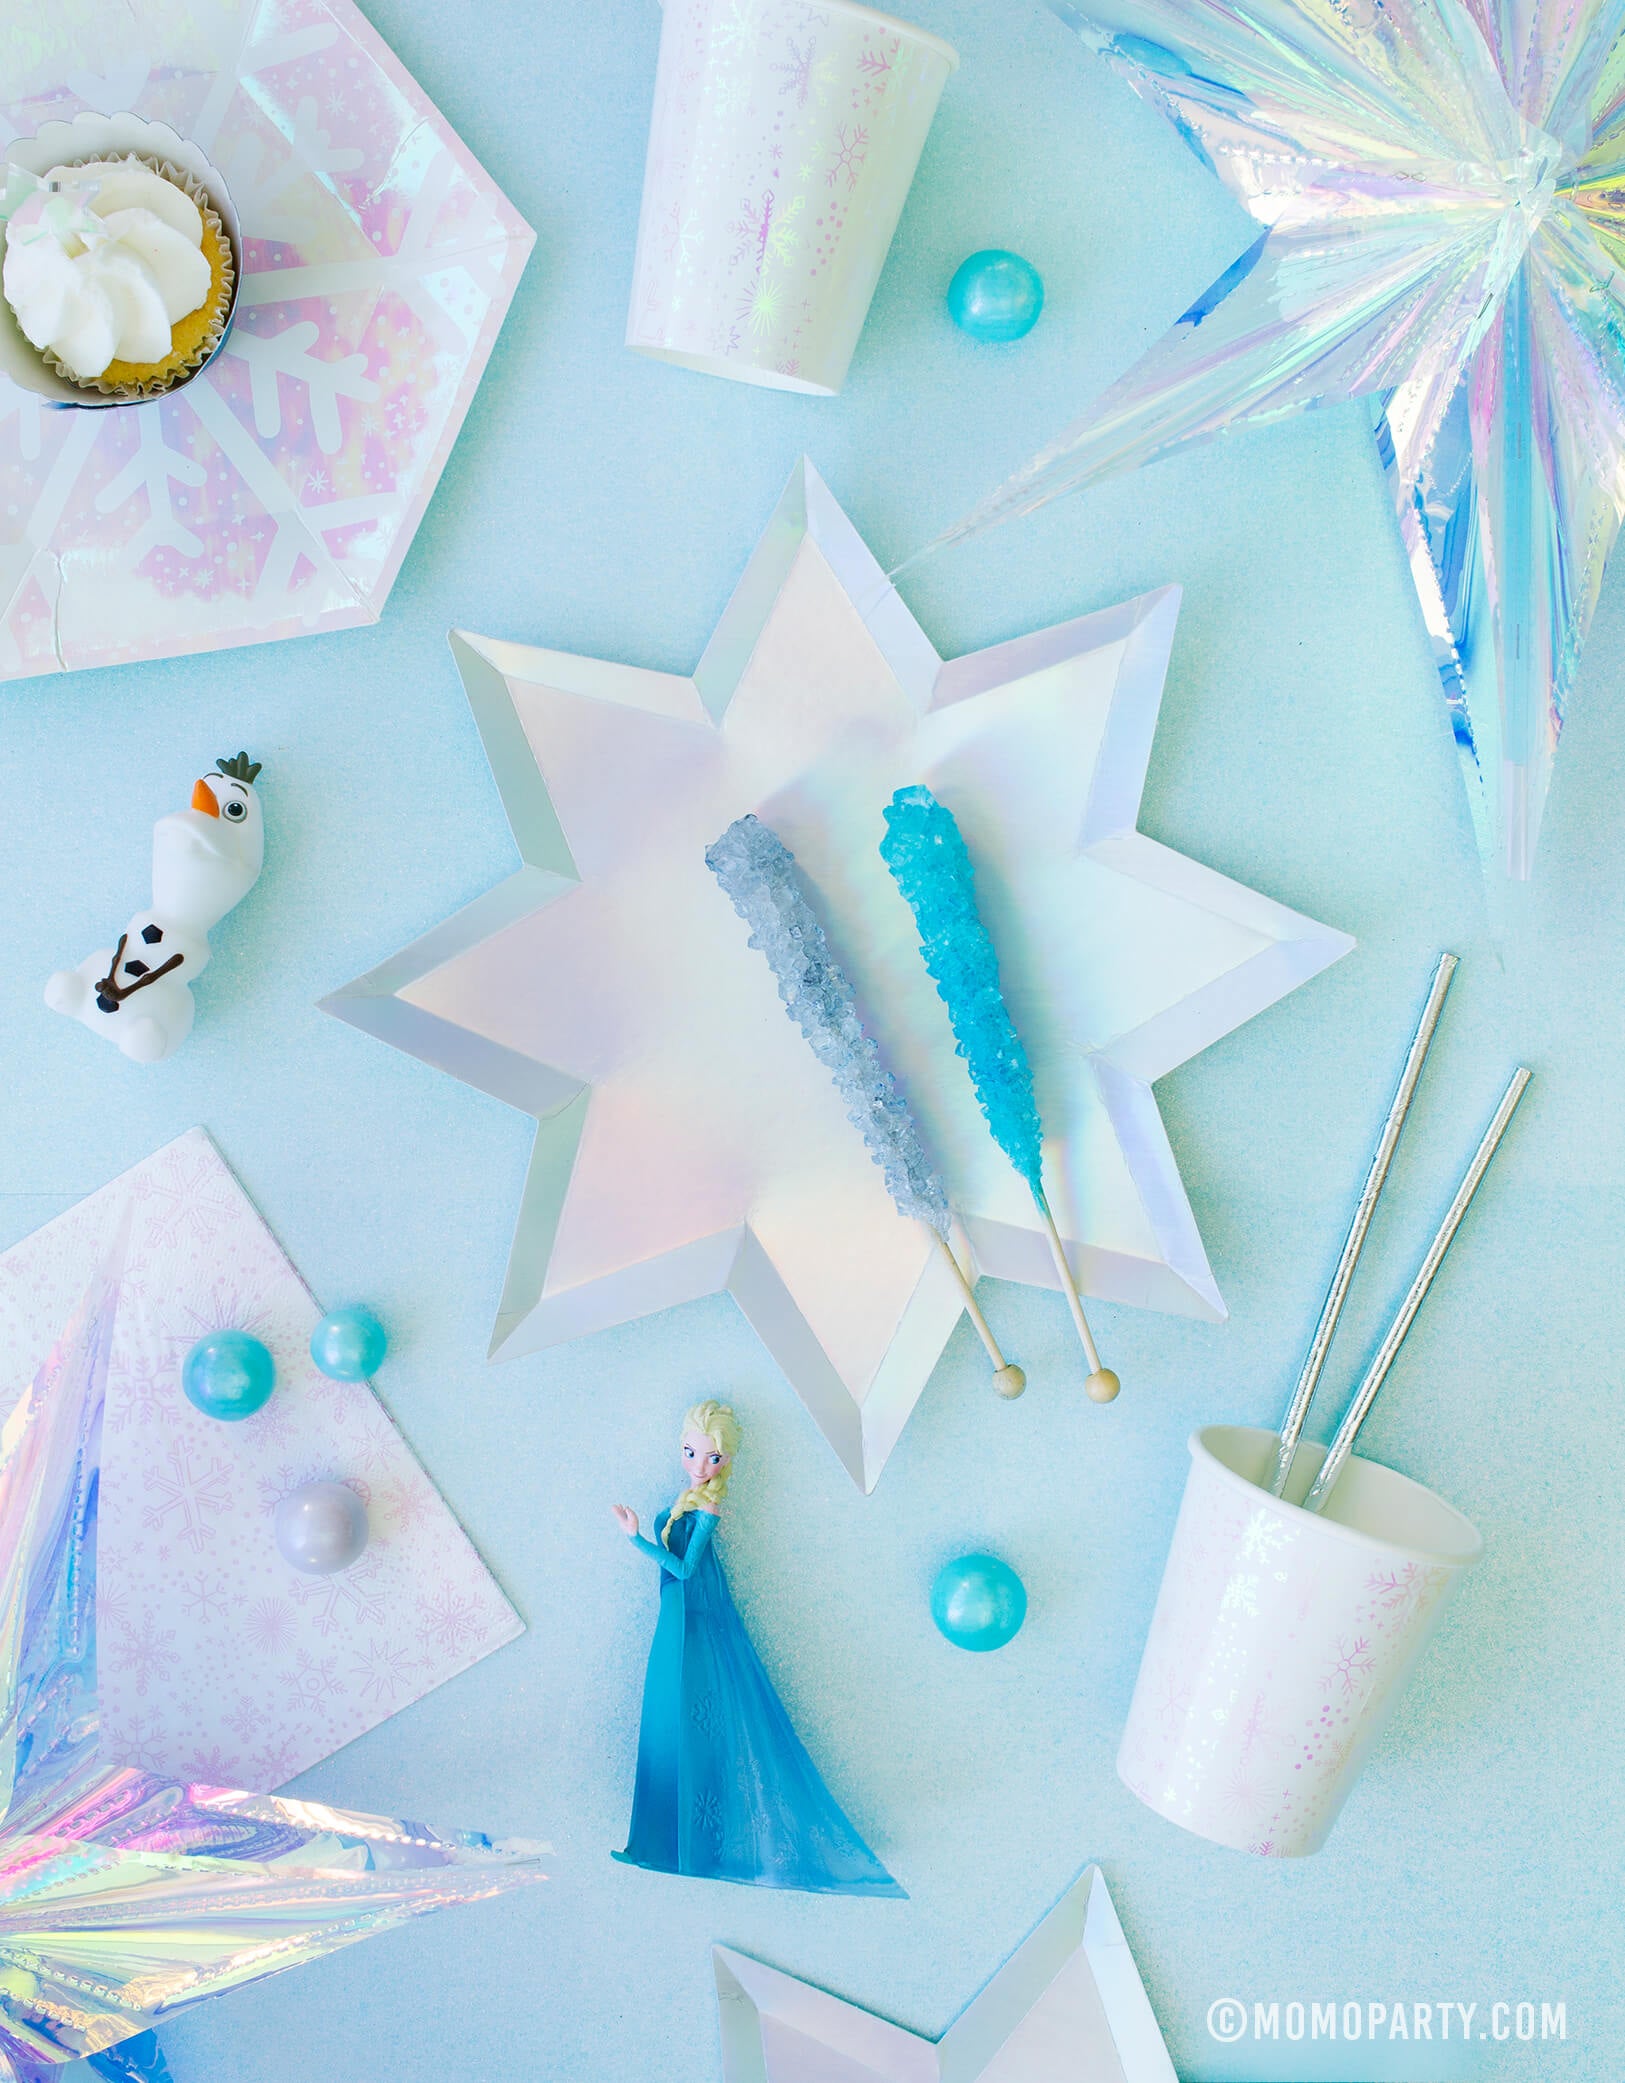 Momo party frozen collection of Frozen themed Morden Party tablewares with Meri Meri 8-point Shining Star Plates, Daydream society Frosted Small Plates, Frosted Cups, Elsa princes and Olaf figure toy as decoration